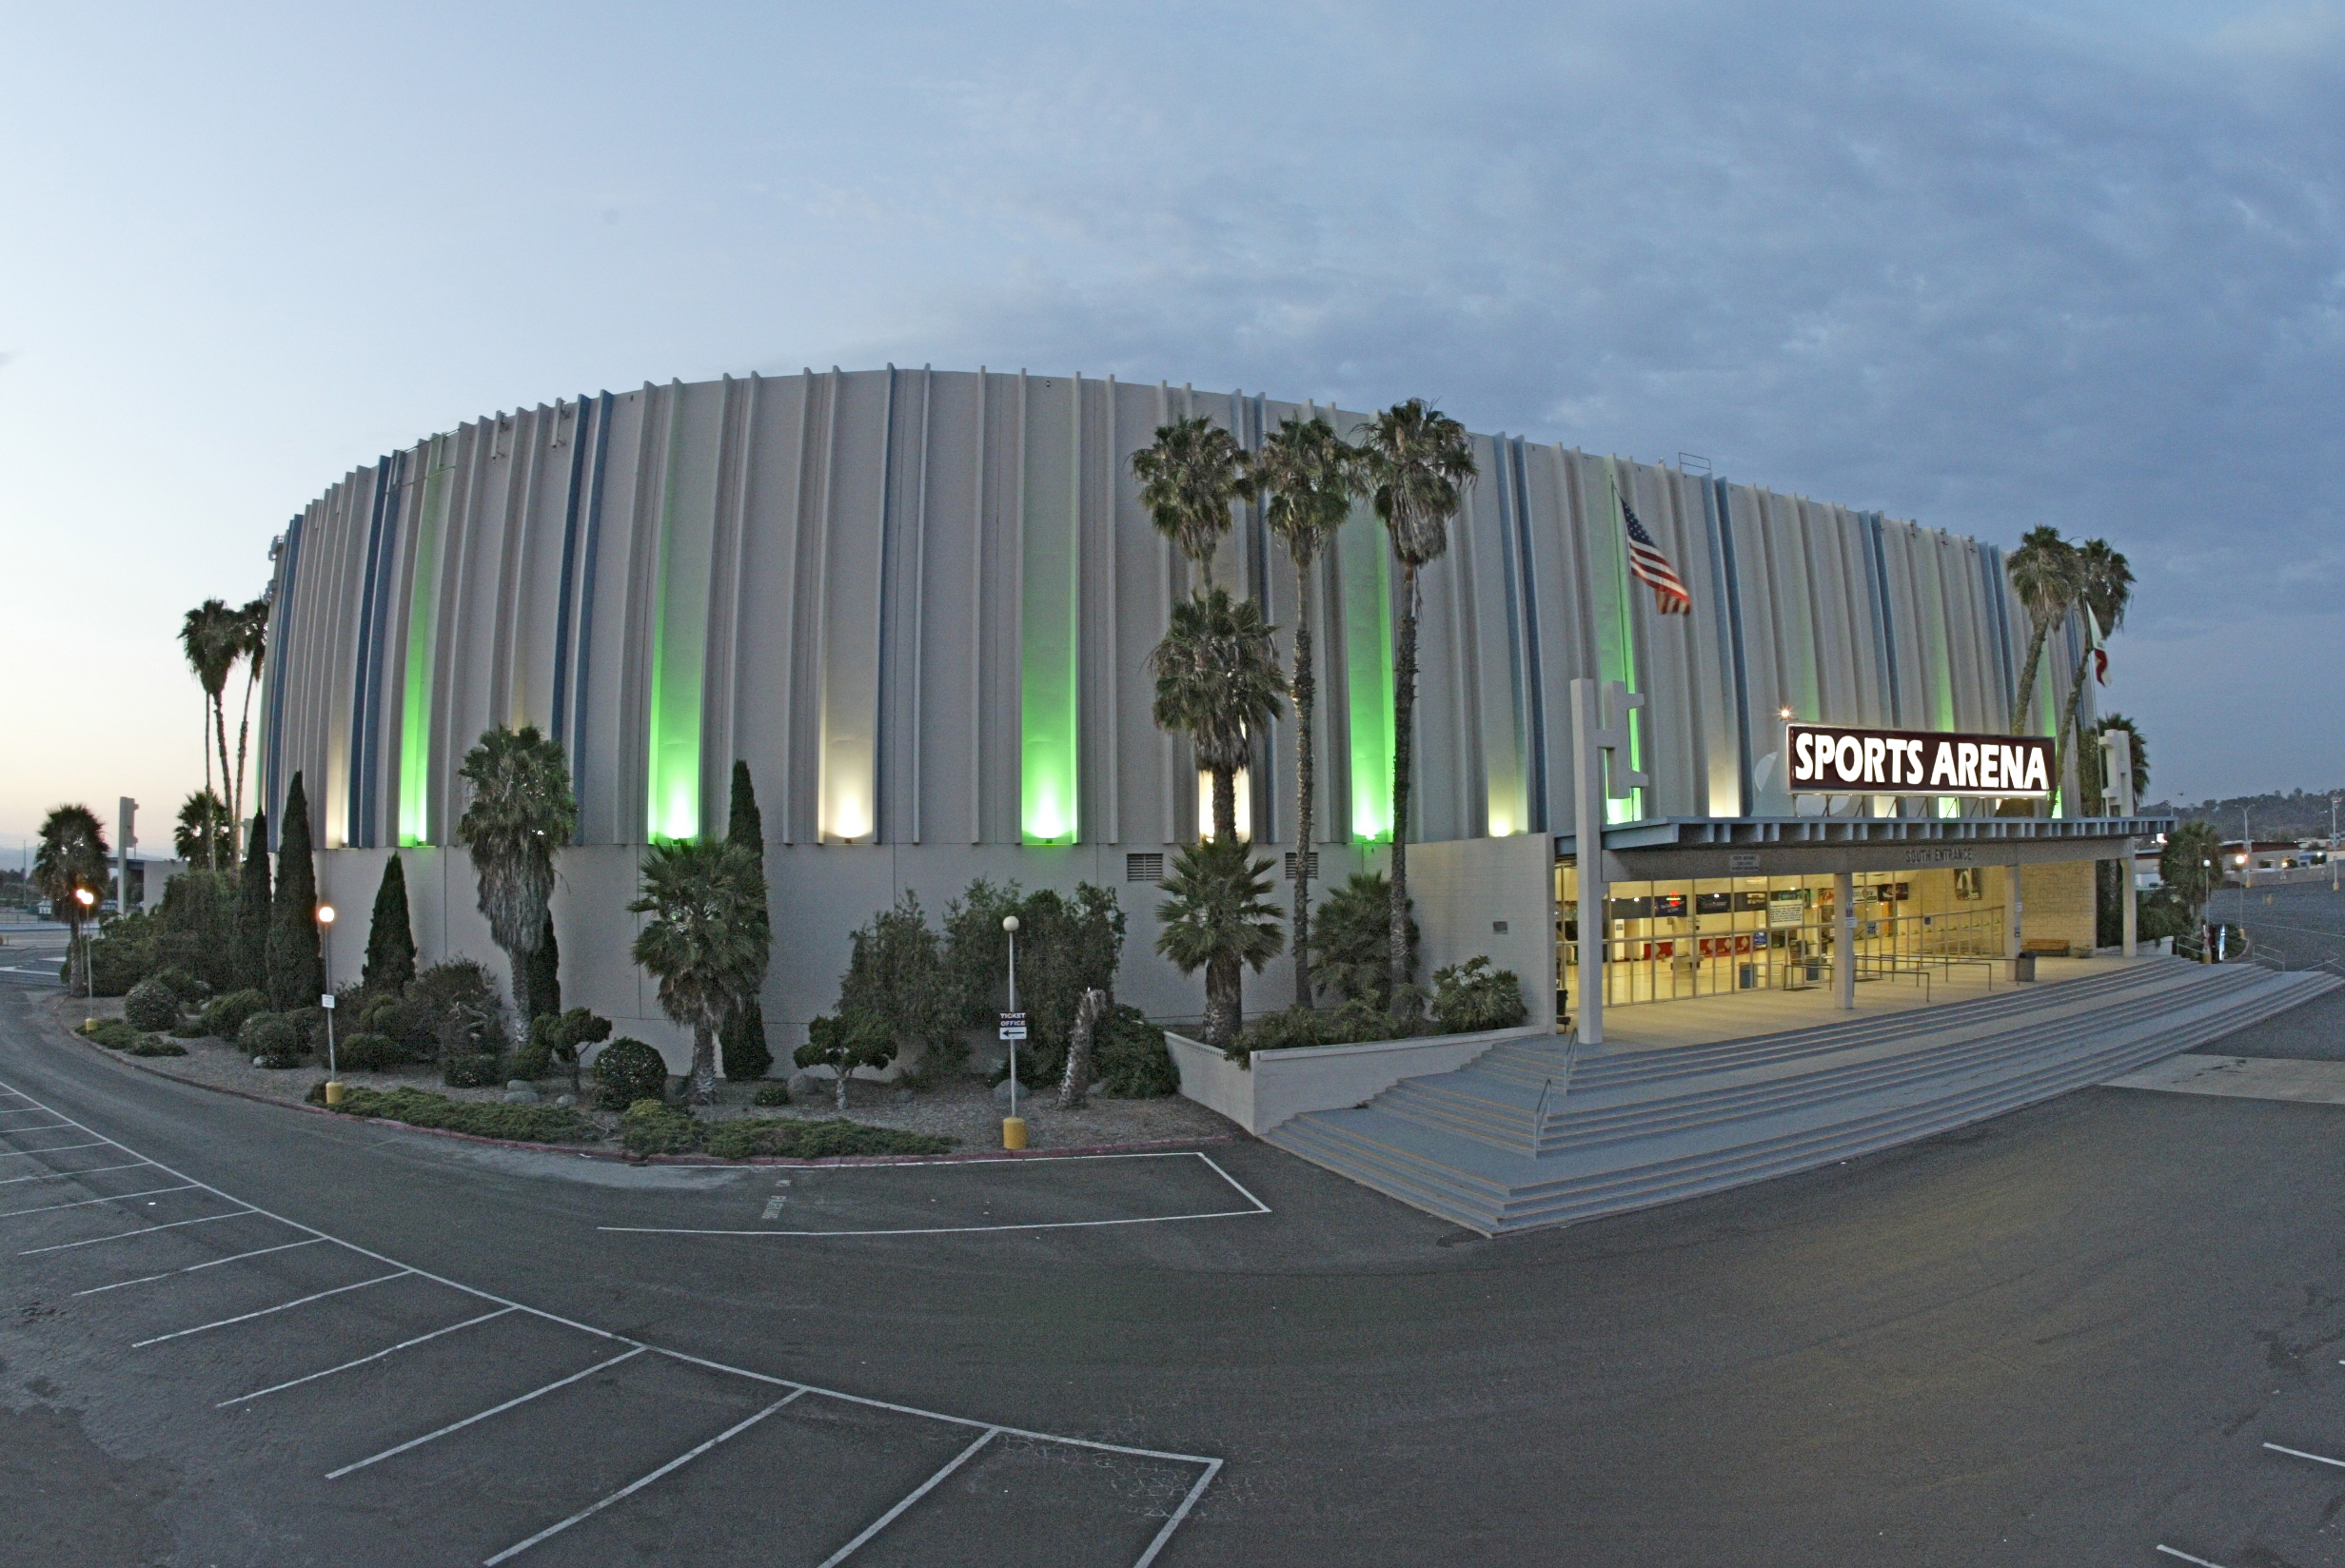 San diego sports arena, invest for long term2464 x 1648